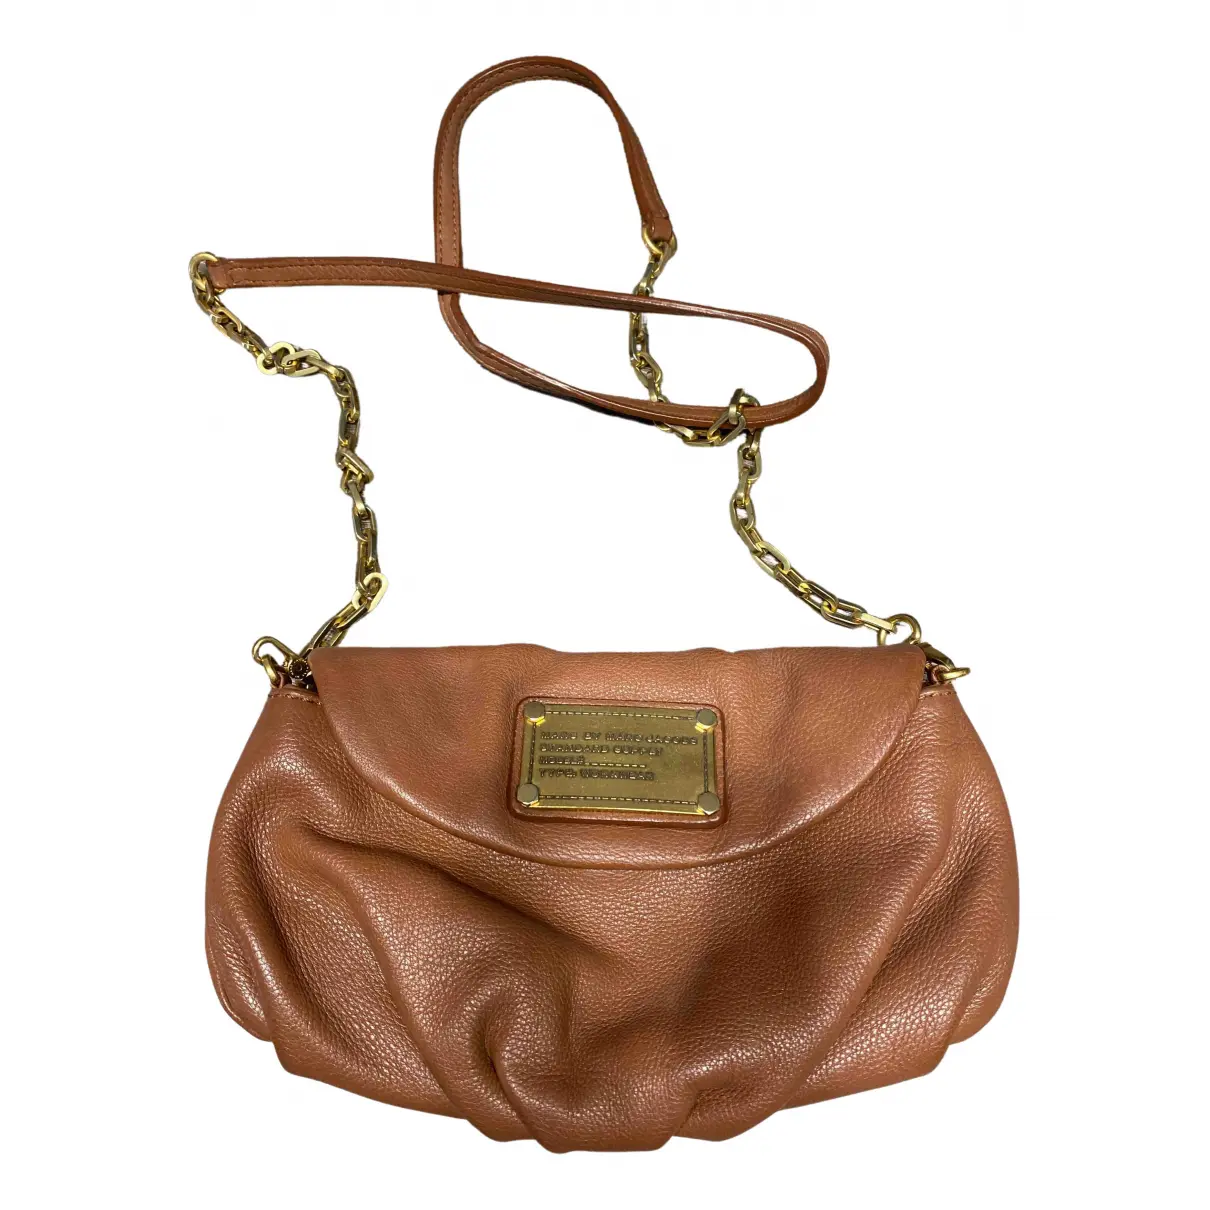 Leather crossbody bag Marc by Marc Jacobs